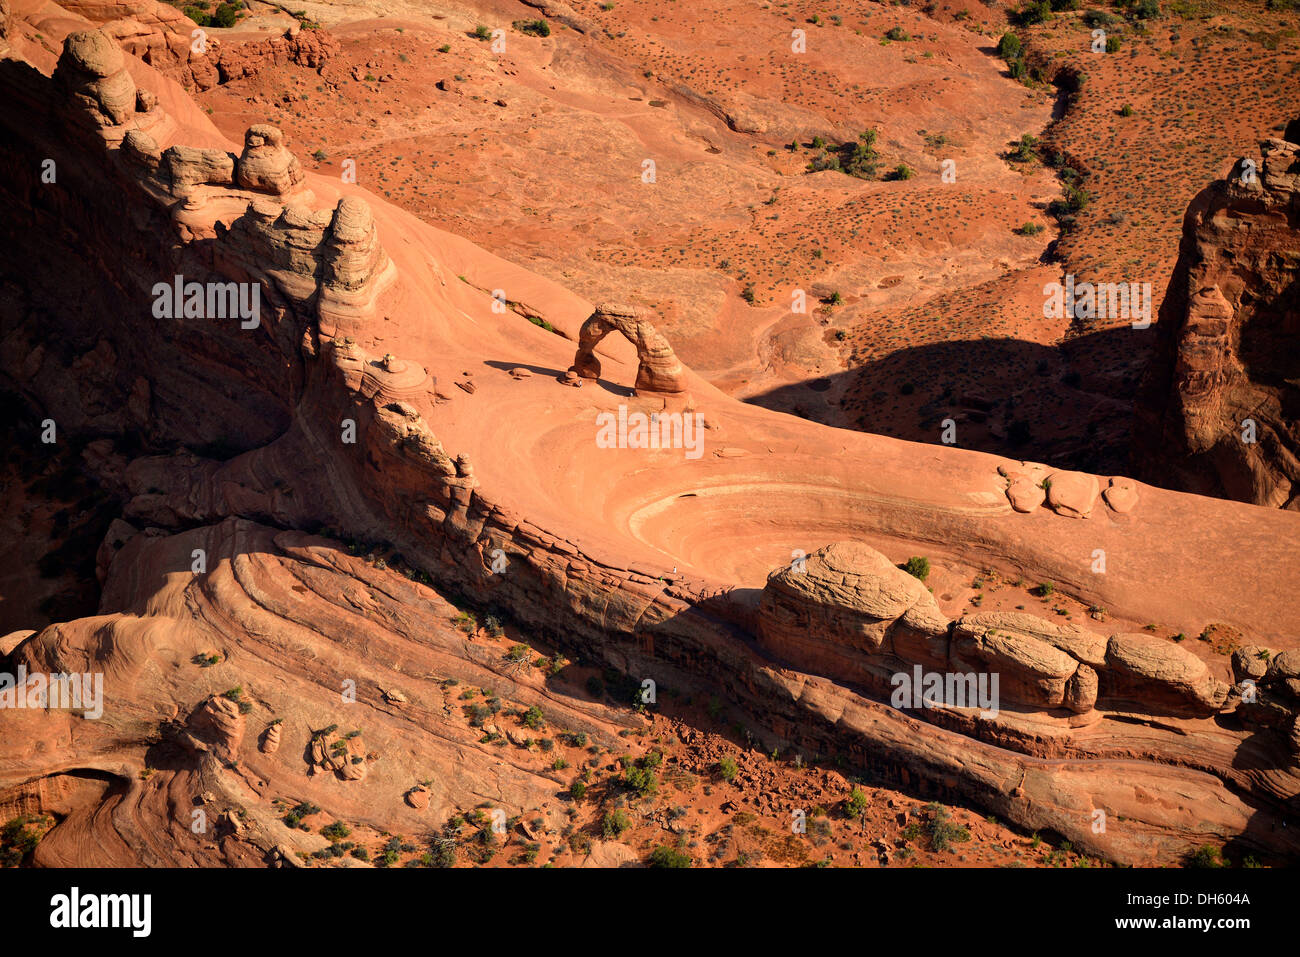 Aerial view of Delicate Arch, Arches National Park, Moab, Utah, United States of America, USA Stock Photo